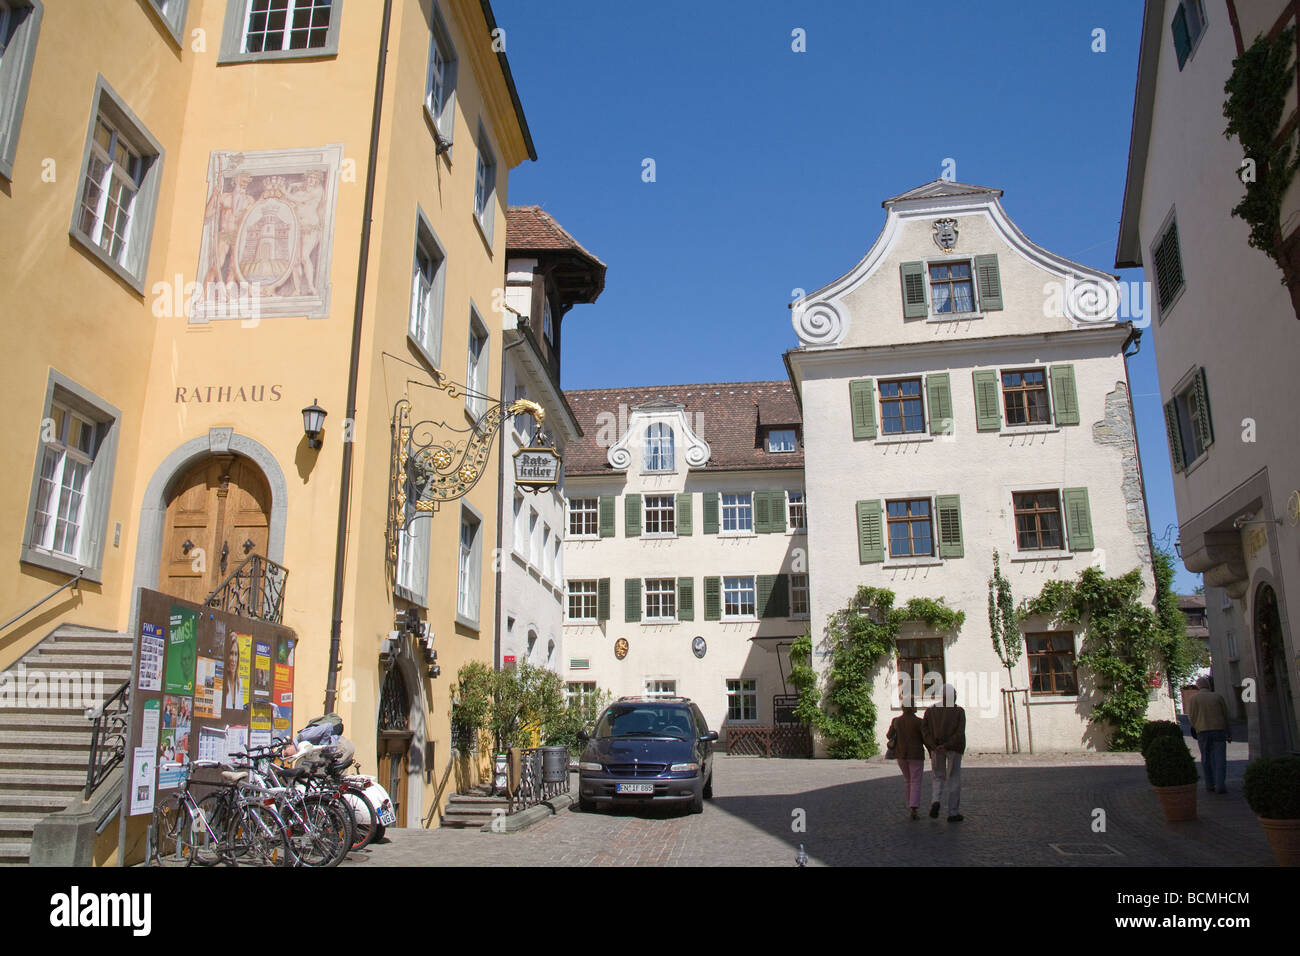 Meersburg Baden Wurttemberg Germany EU Rathaus Town Hall in Oberstadt upper part of this medieval town Stock Photo